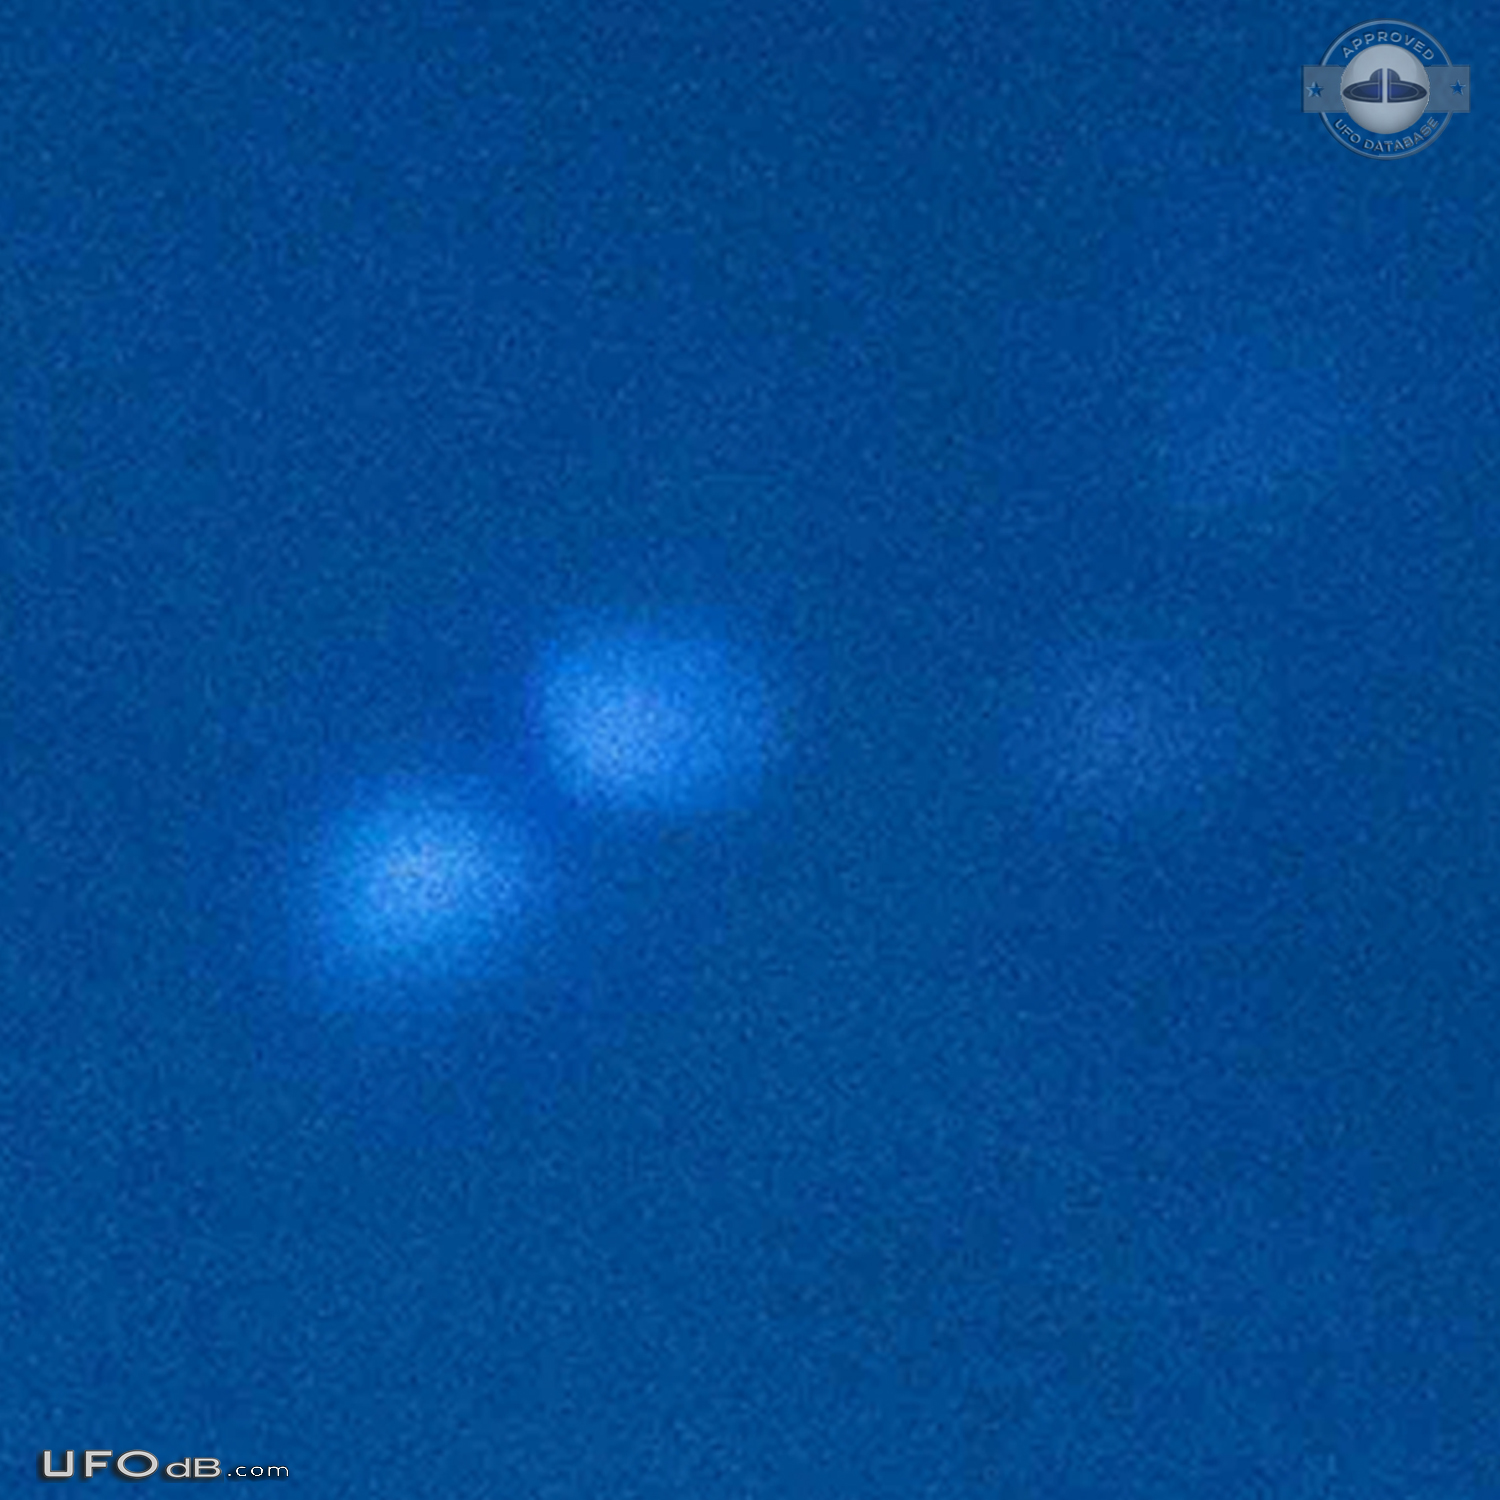 UFO light coming from inside clouds, circle shape. Blinking Pszczyna P UFO Picture #799-4